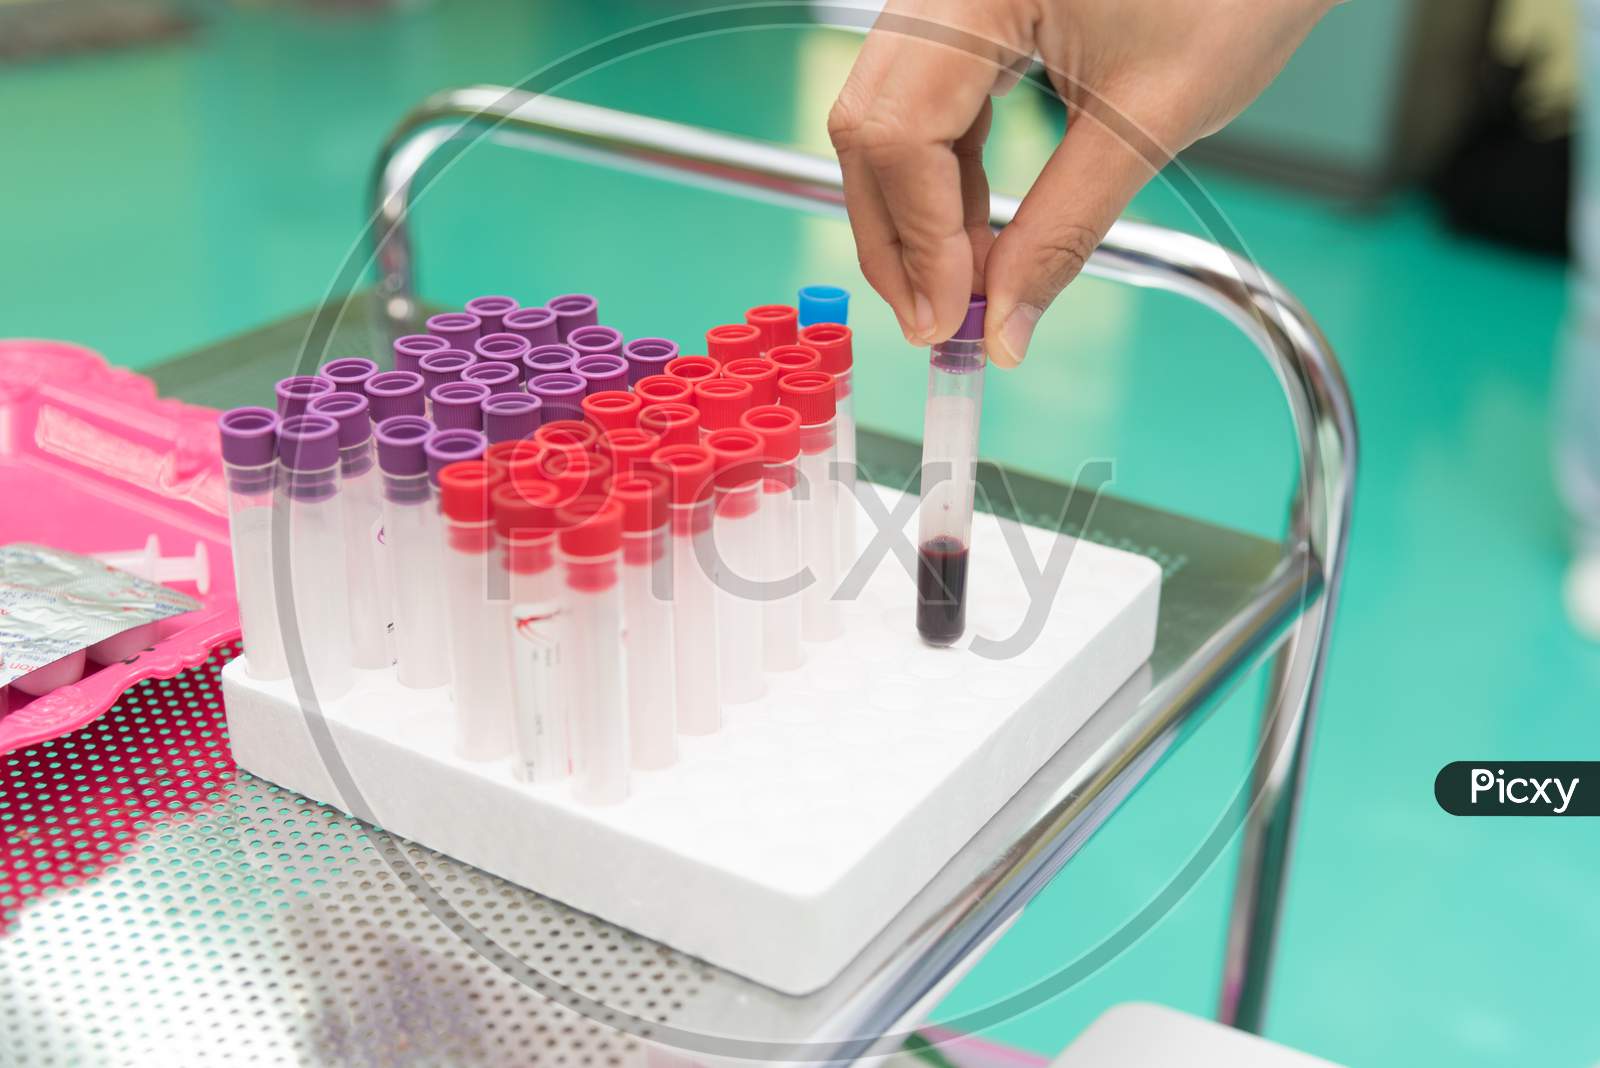 Blood Test Collect In Test Tube At Laboratory Of Hospital. Physical Examination And Healthcare Concept